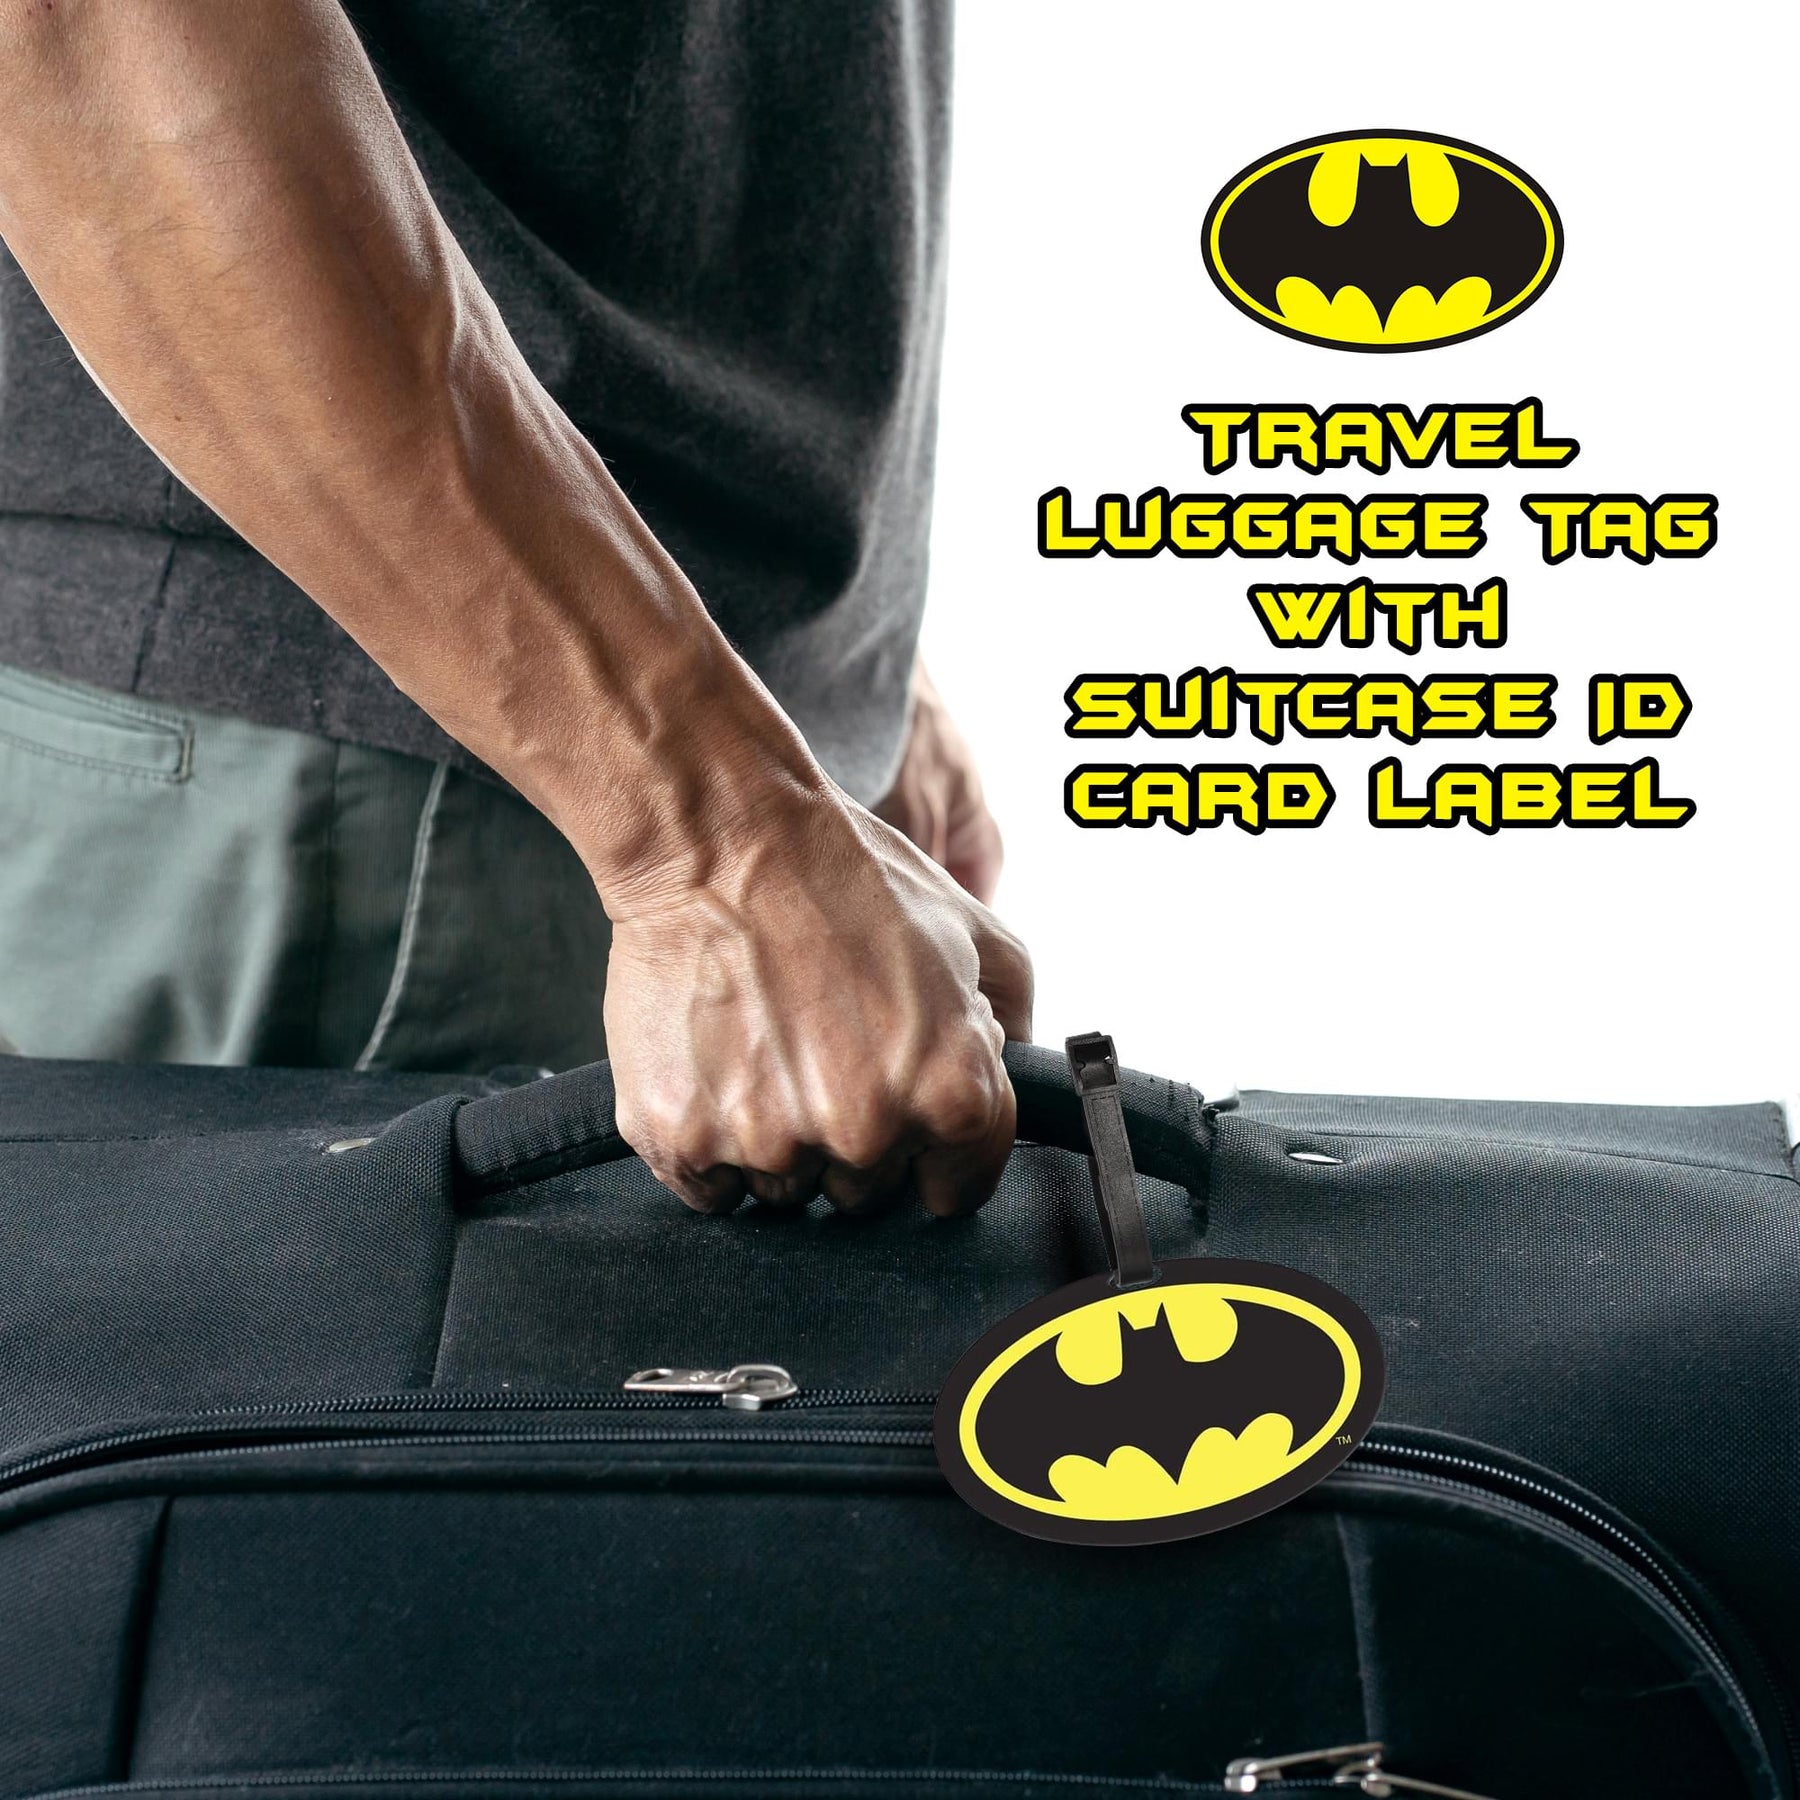 DC Comics Batman Logo Travel Luggage Tag With Suitcase ID Card Label